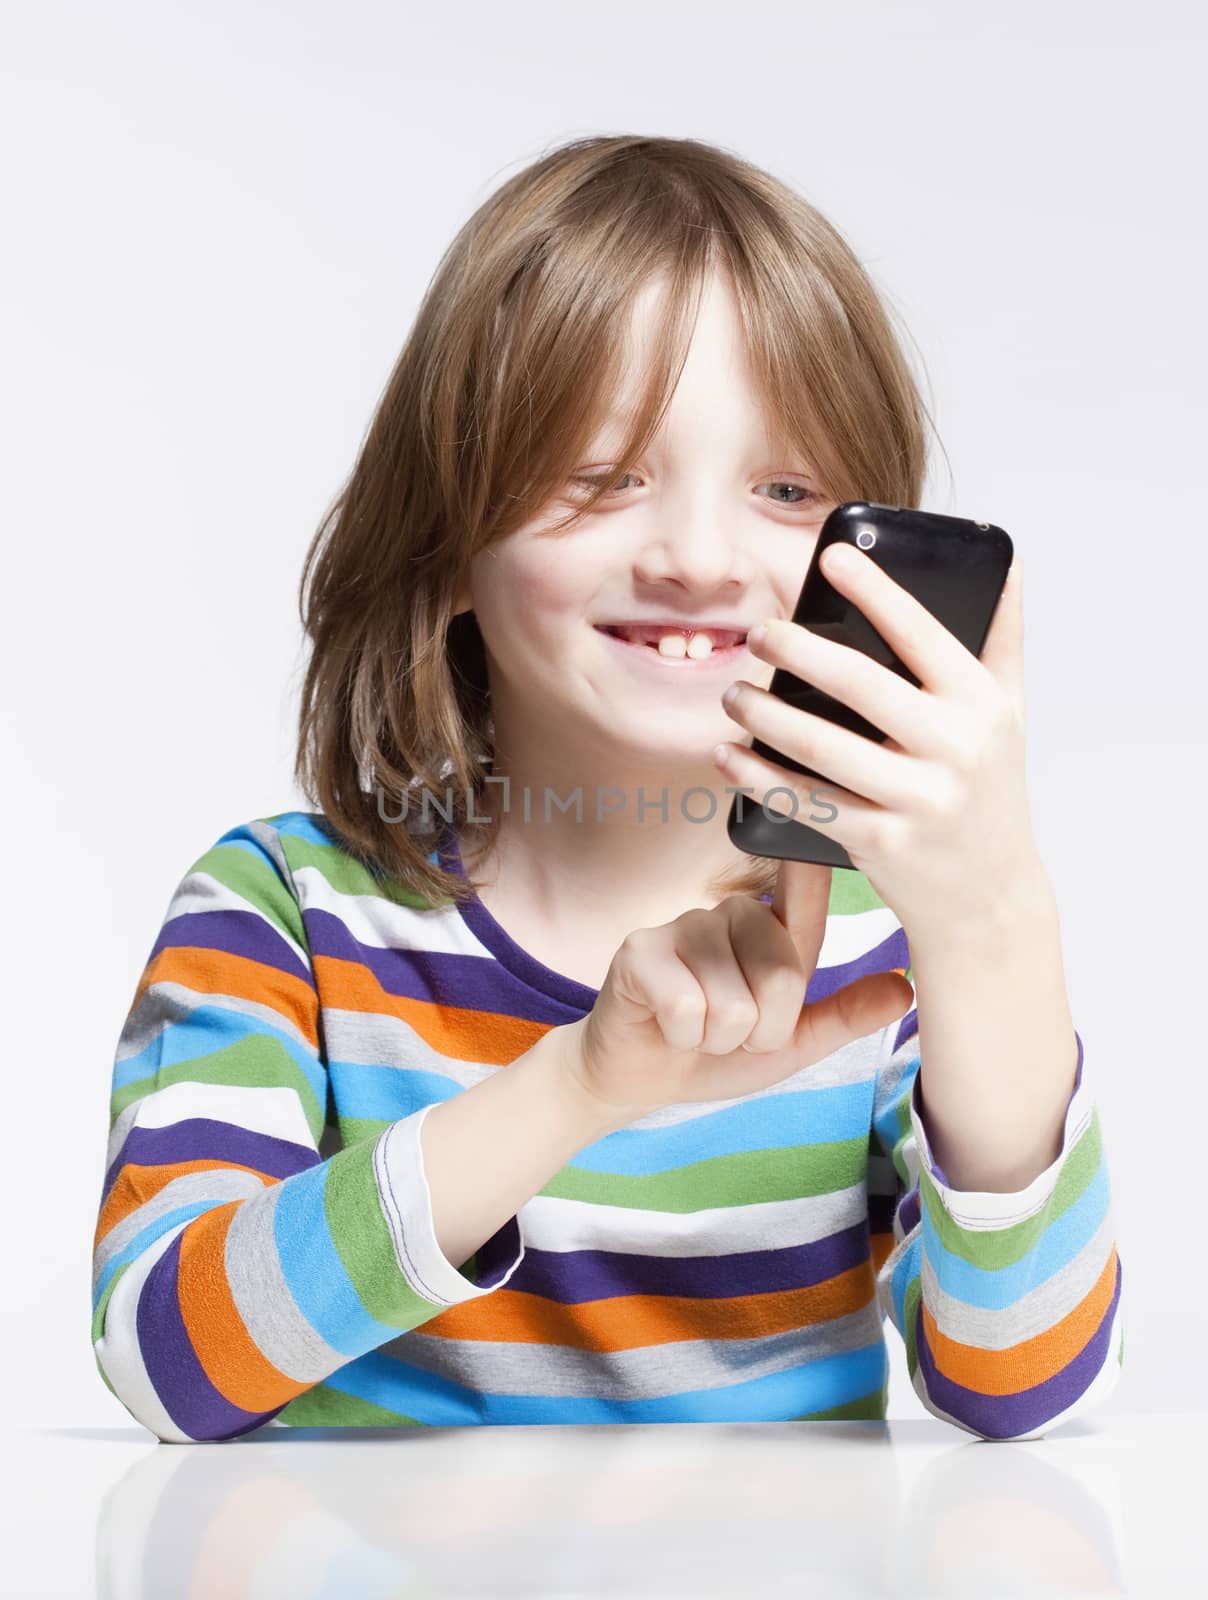 Boy Reading Text Message on Mobile Phone by courtyardpix